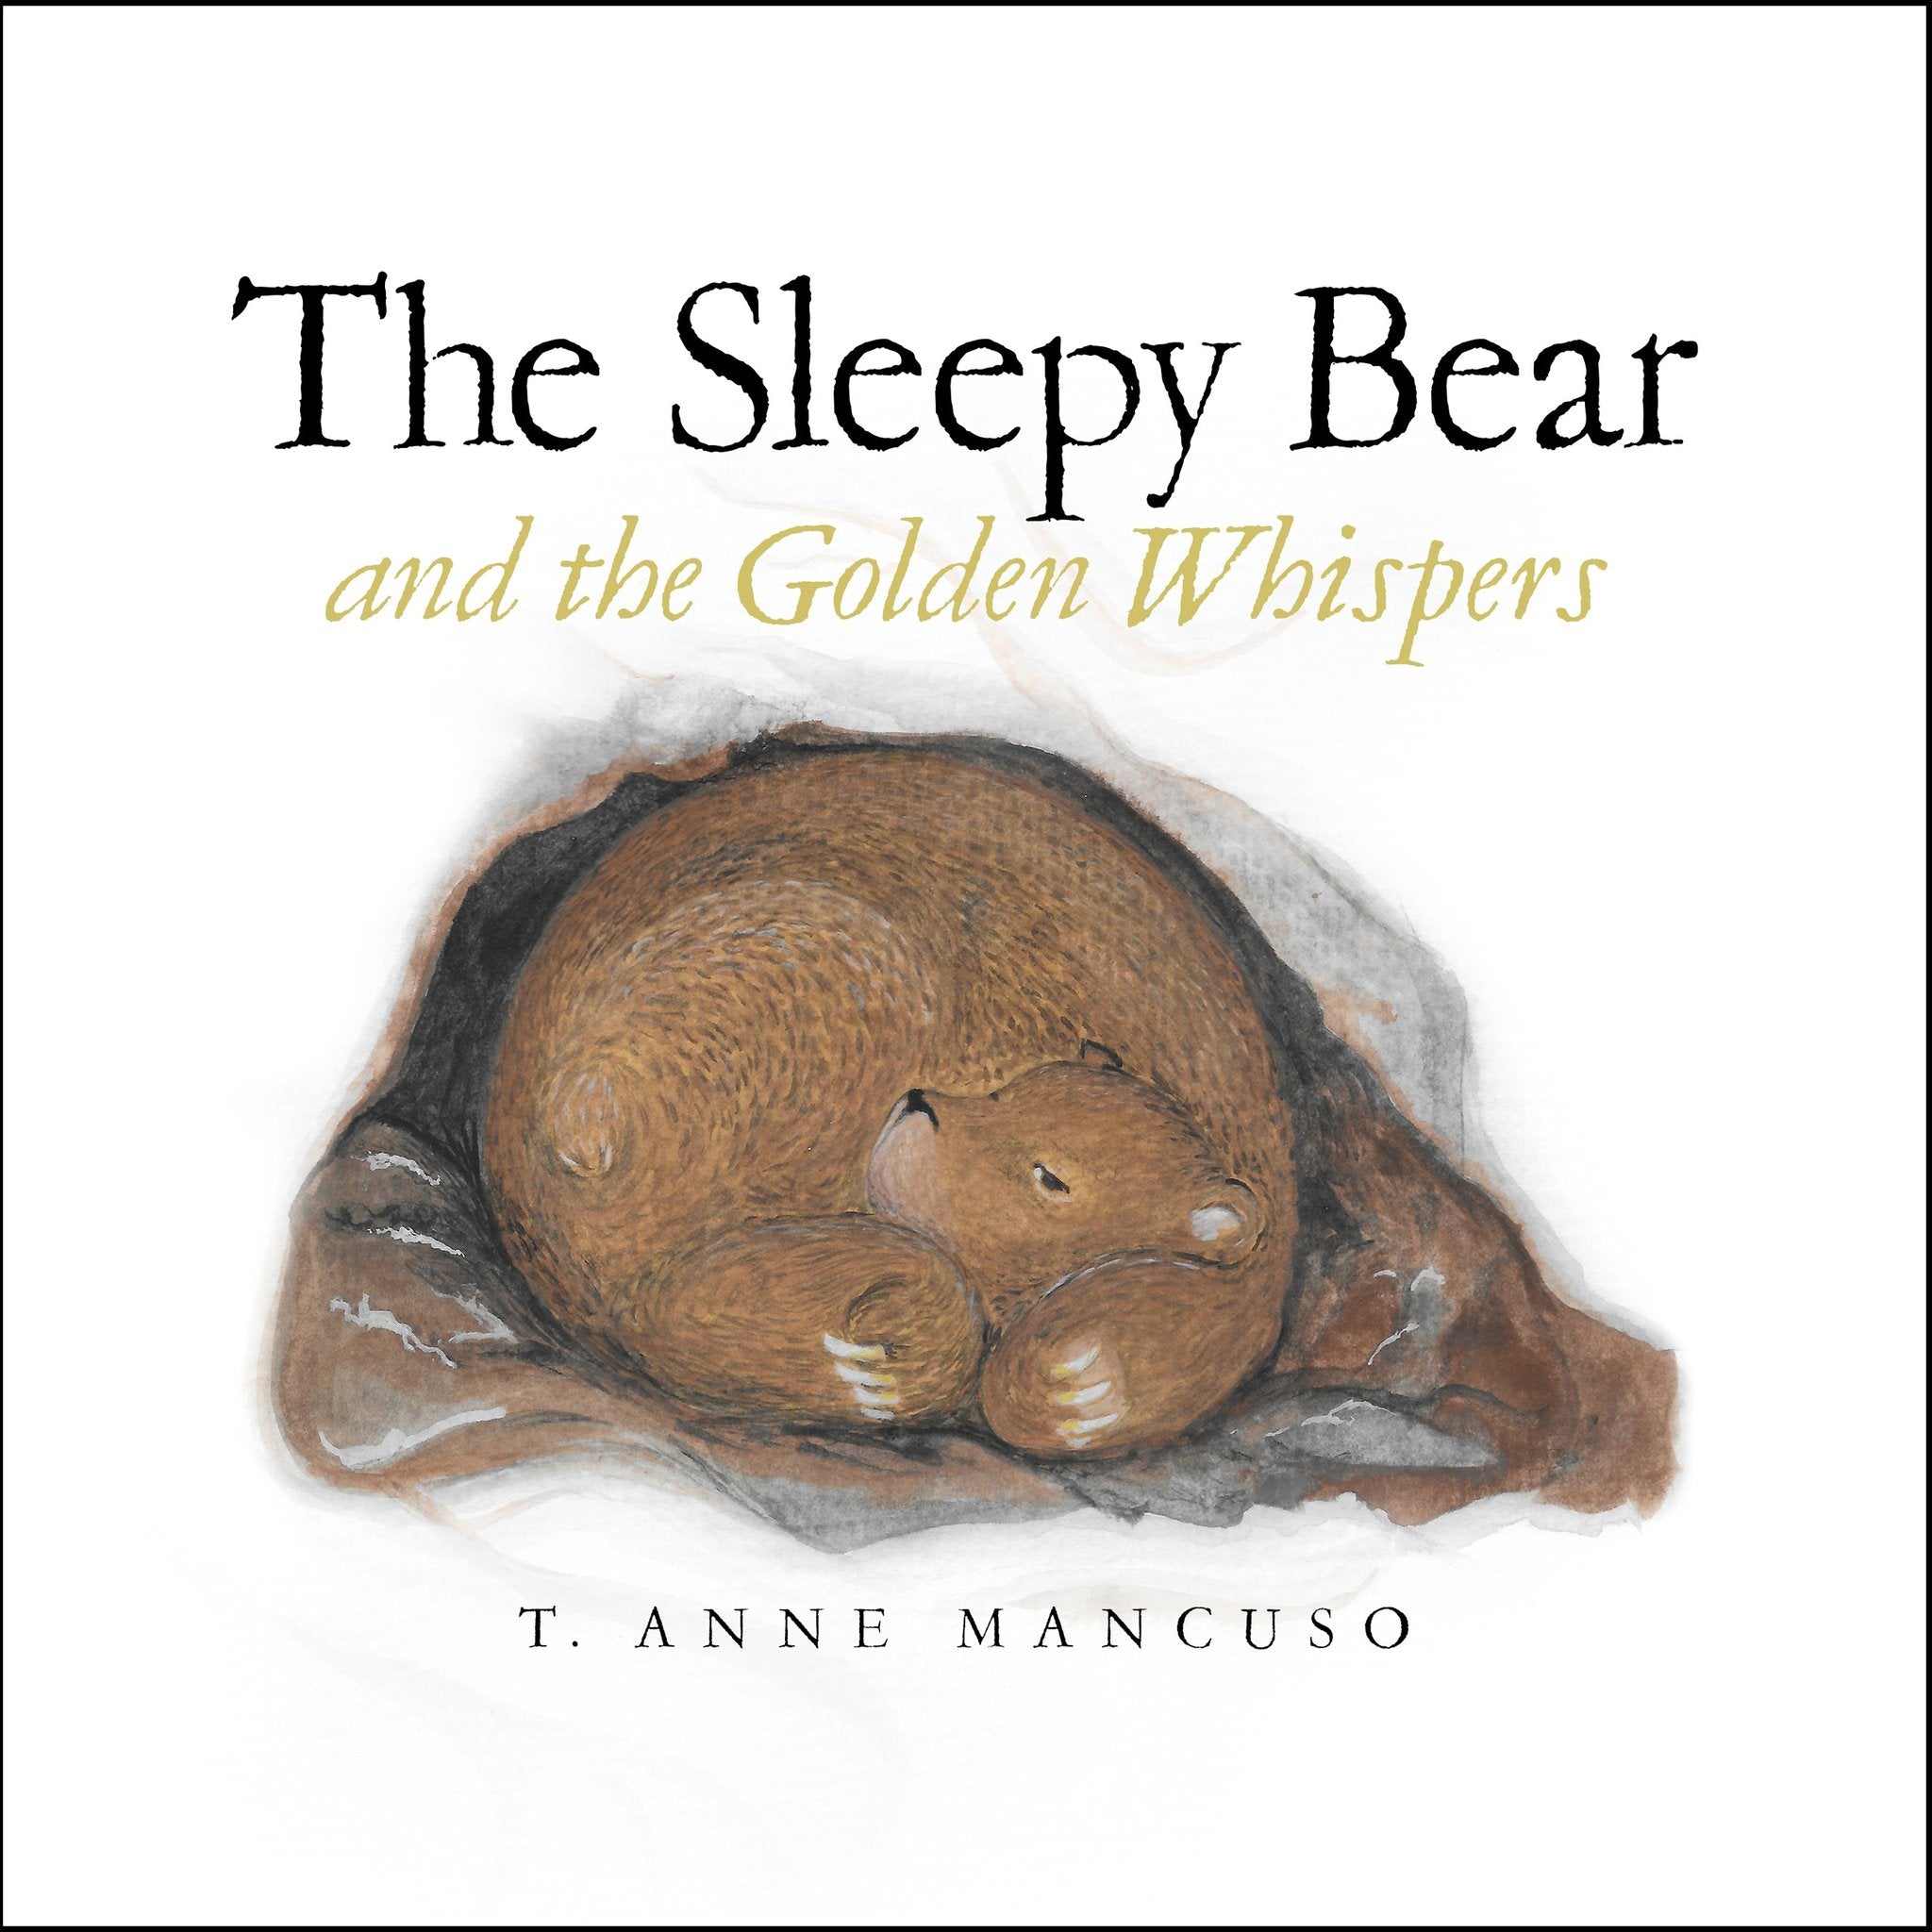 The Sleepy Bear and the Gold Whispers